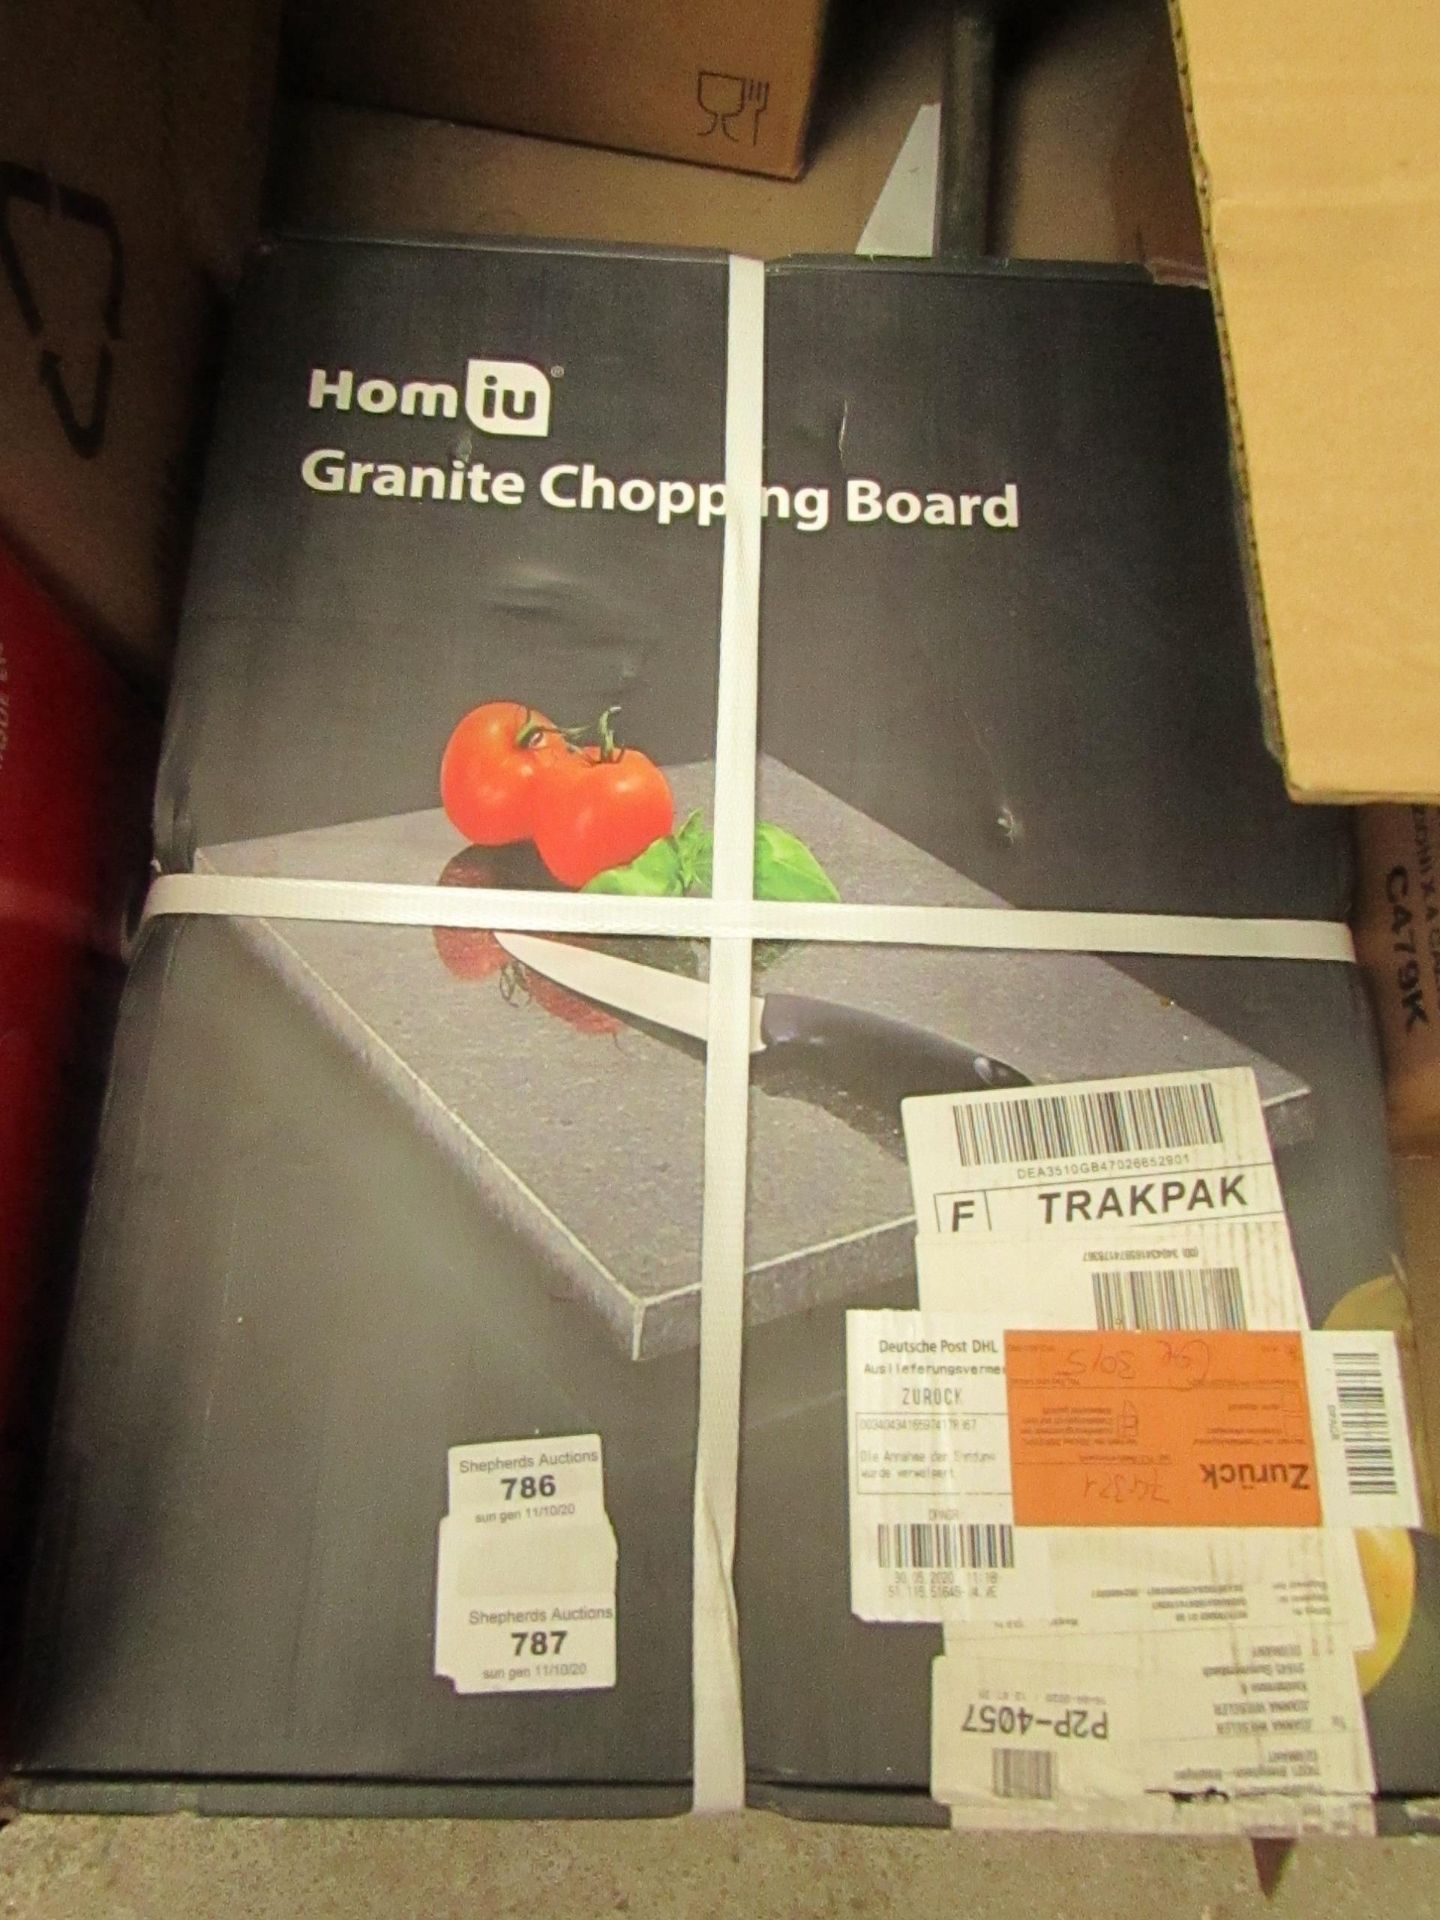 Homiu Granite Chopping Board. Boxed but unchecked